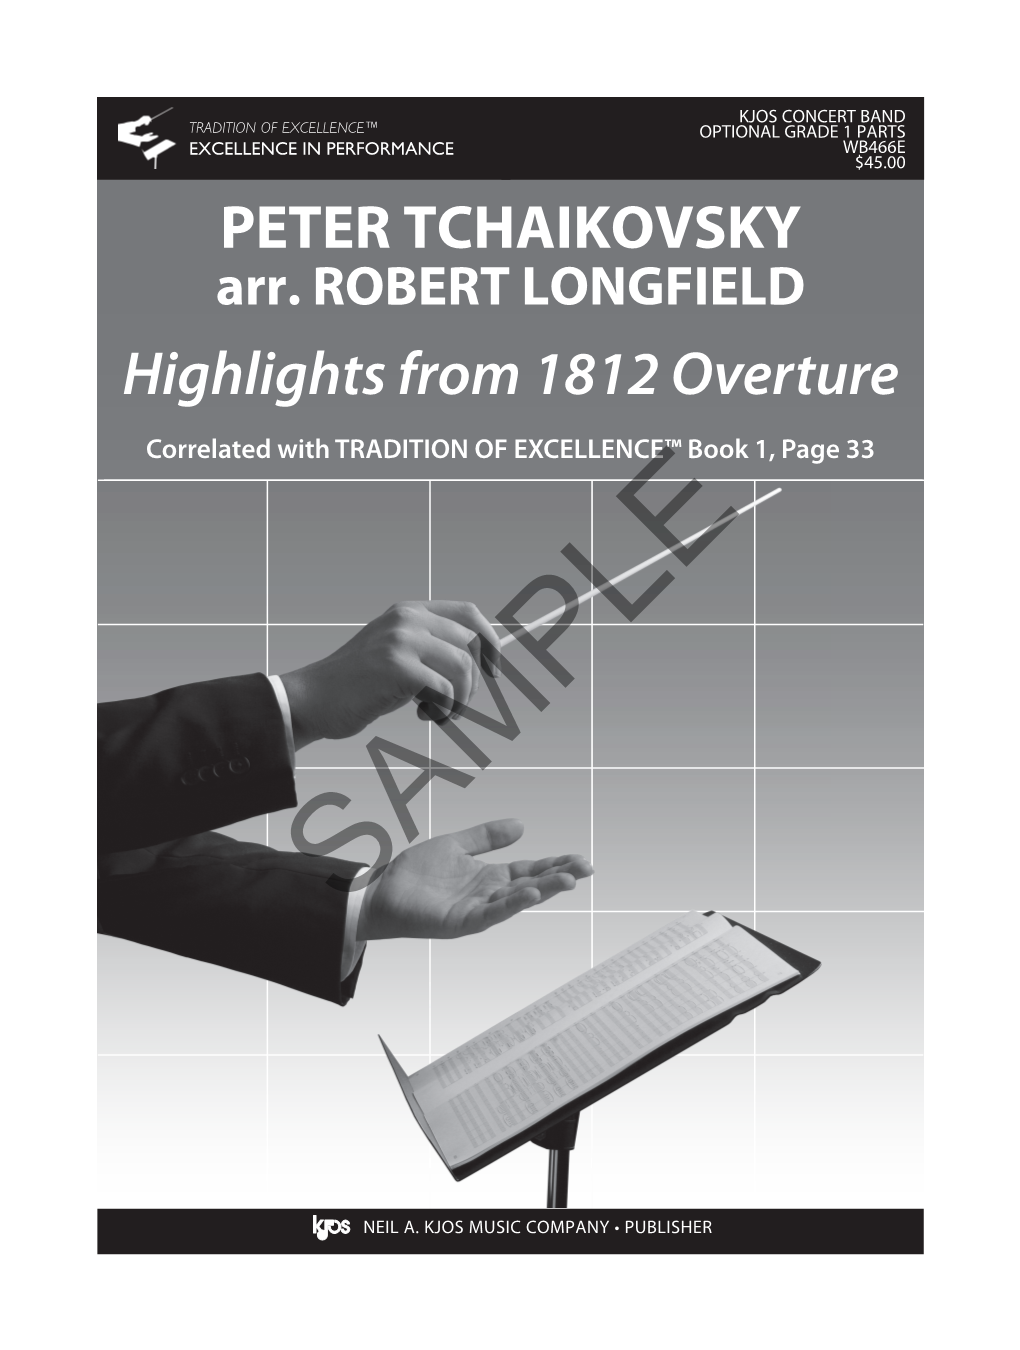 PETER TCHAIKOVSKY Highlights from 1812 Overture